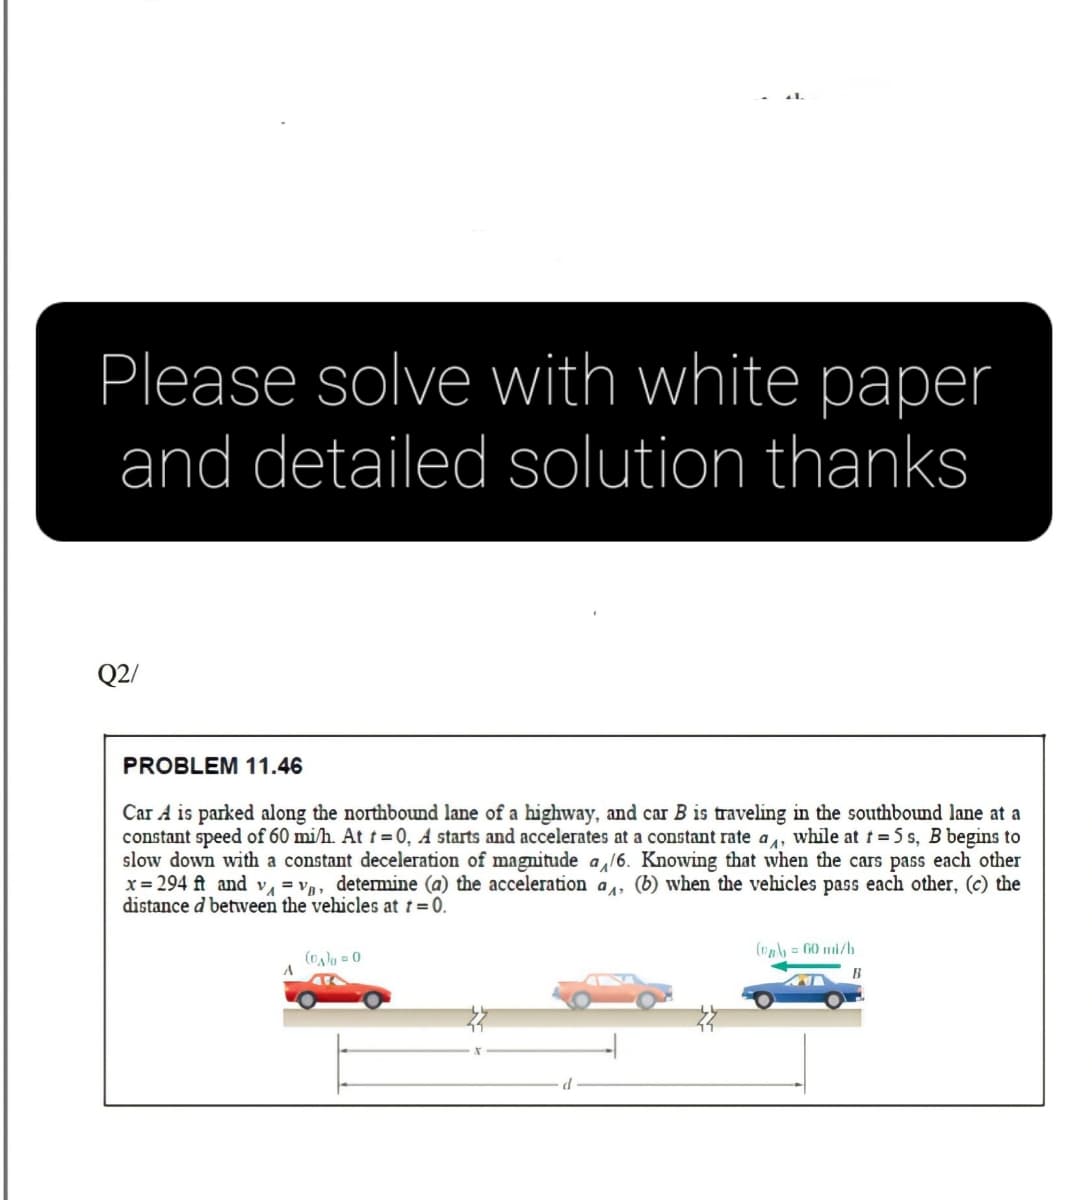 Please solve with white paper
and detailed solution thanks
Q2/
PROBLEM 11.46
Car A is parked along the northbound lane of a highway, and car B is traveling in the southbound lane at a
constant speed of 60 mi/h. At t 0, A starts and accelerates at a constant rate a,, while at t = 5 s, B begins to
slow down with a constant deceleration of magnitude a /6. Knowing that when the cars pass each other
x = 294 ft and v, = v, detemine (a) the acceleration a, (b) when the vehicles pass each other, (c) the
distance d betwveen the vehicles at 1 = 0.
(v= G0 mi/h
(Da)g = 0
B
